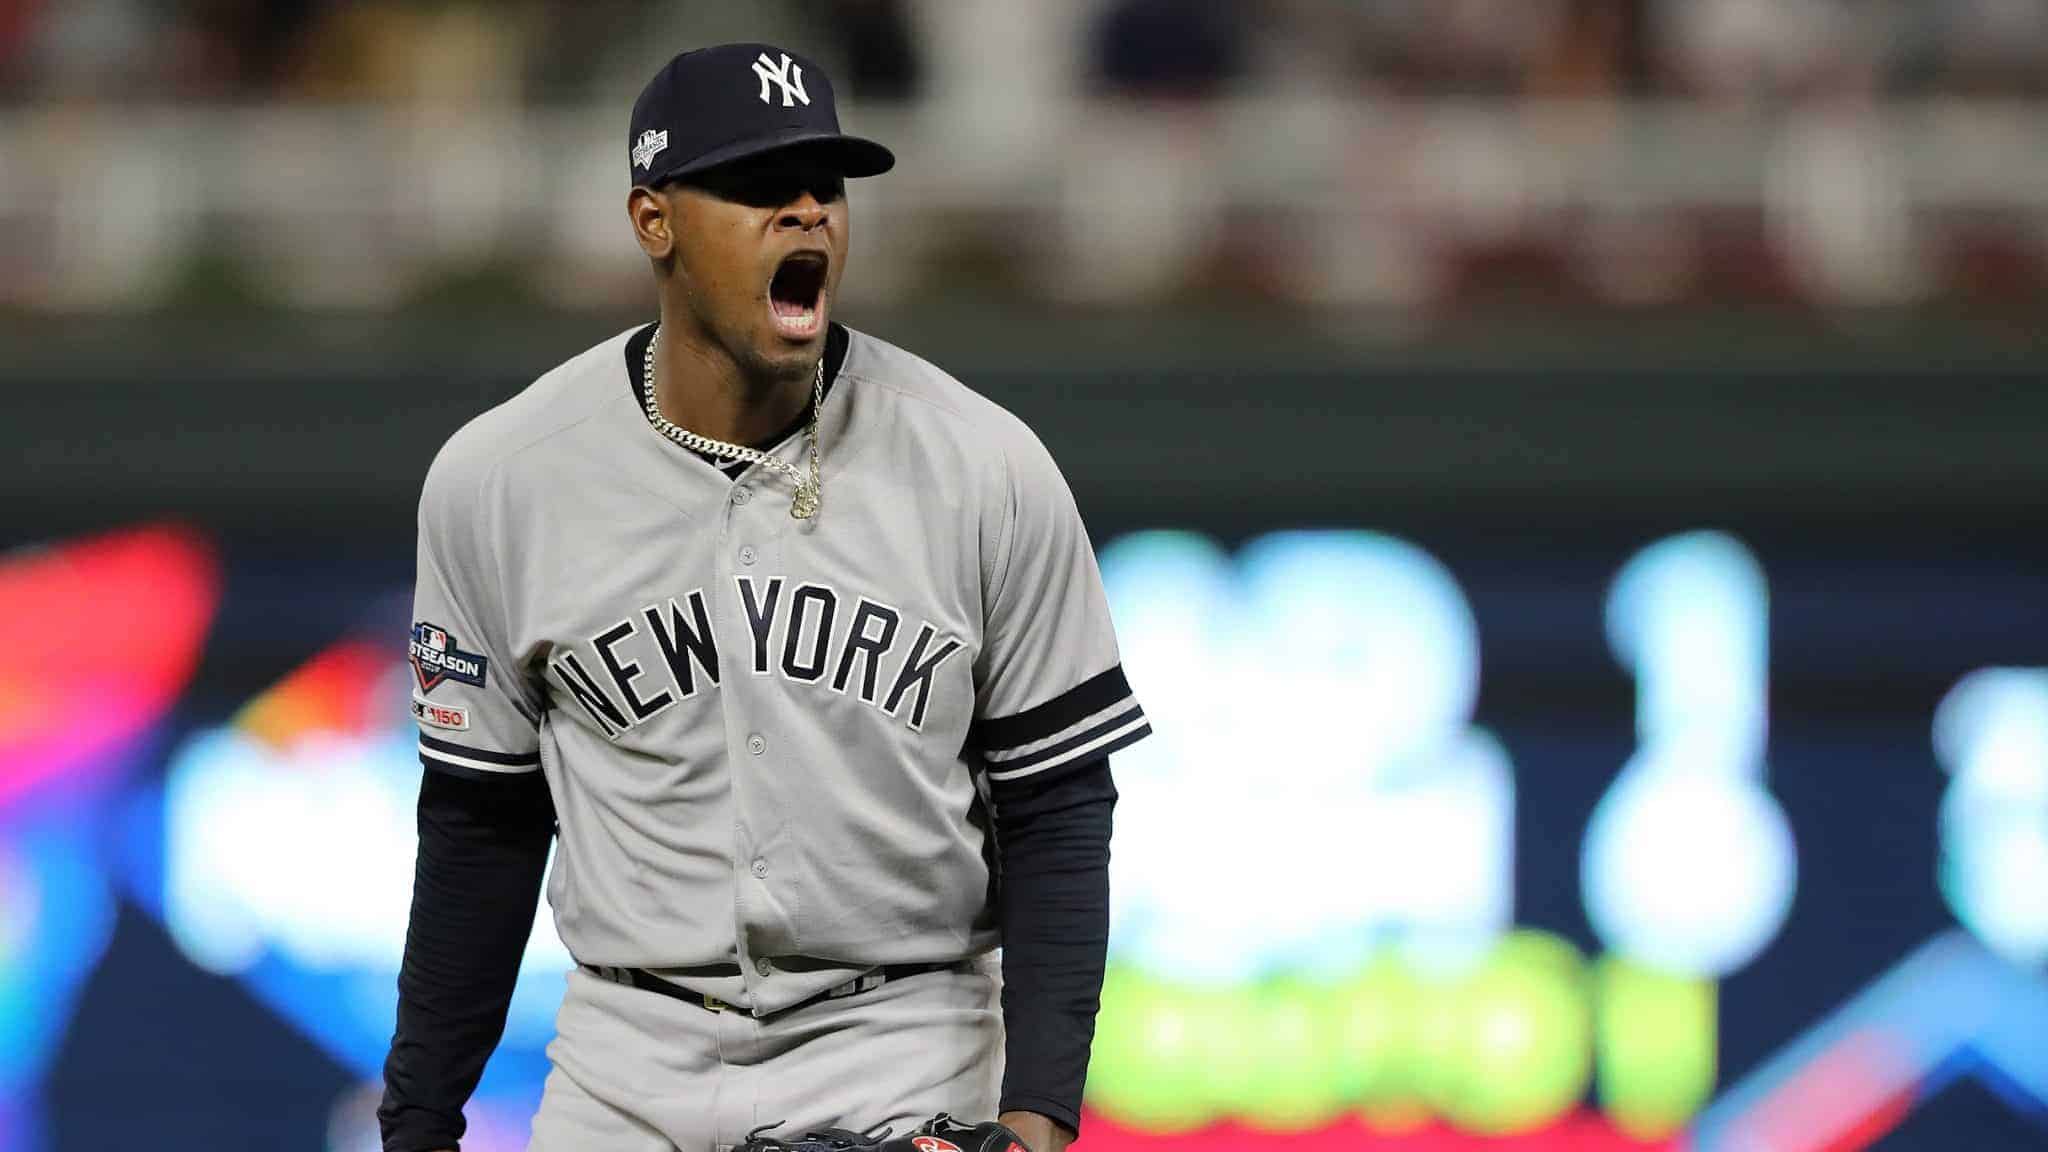 MINNEAPOLIS, MINNESOTA - OCTOBER 07: Luis Severino #40 of the New York Yankees reacts after striking out Jake Cave #60 of the Minnesota Twins with the bases loaded in the second inning of game three of the American League Division Series at Target Field on October 07, 2019 in Minneapolis, Minnesota.